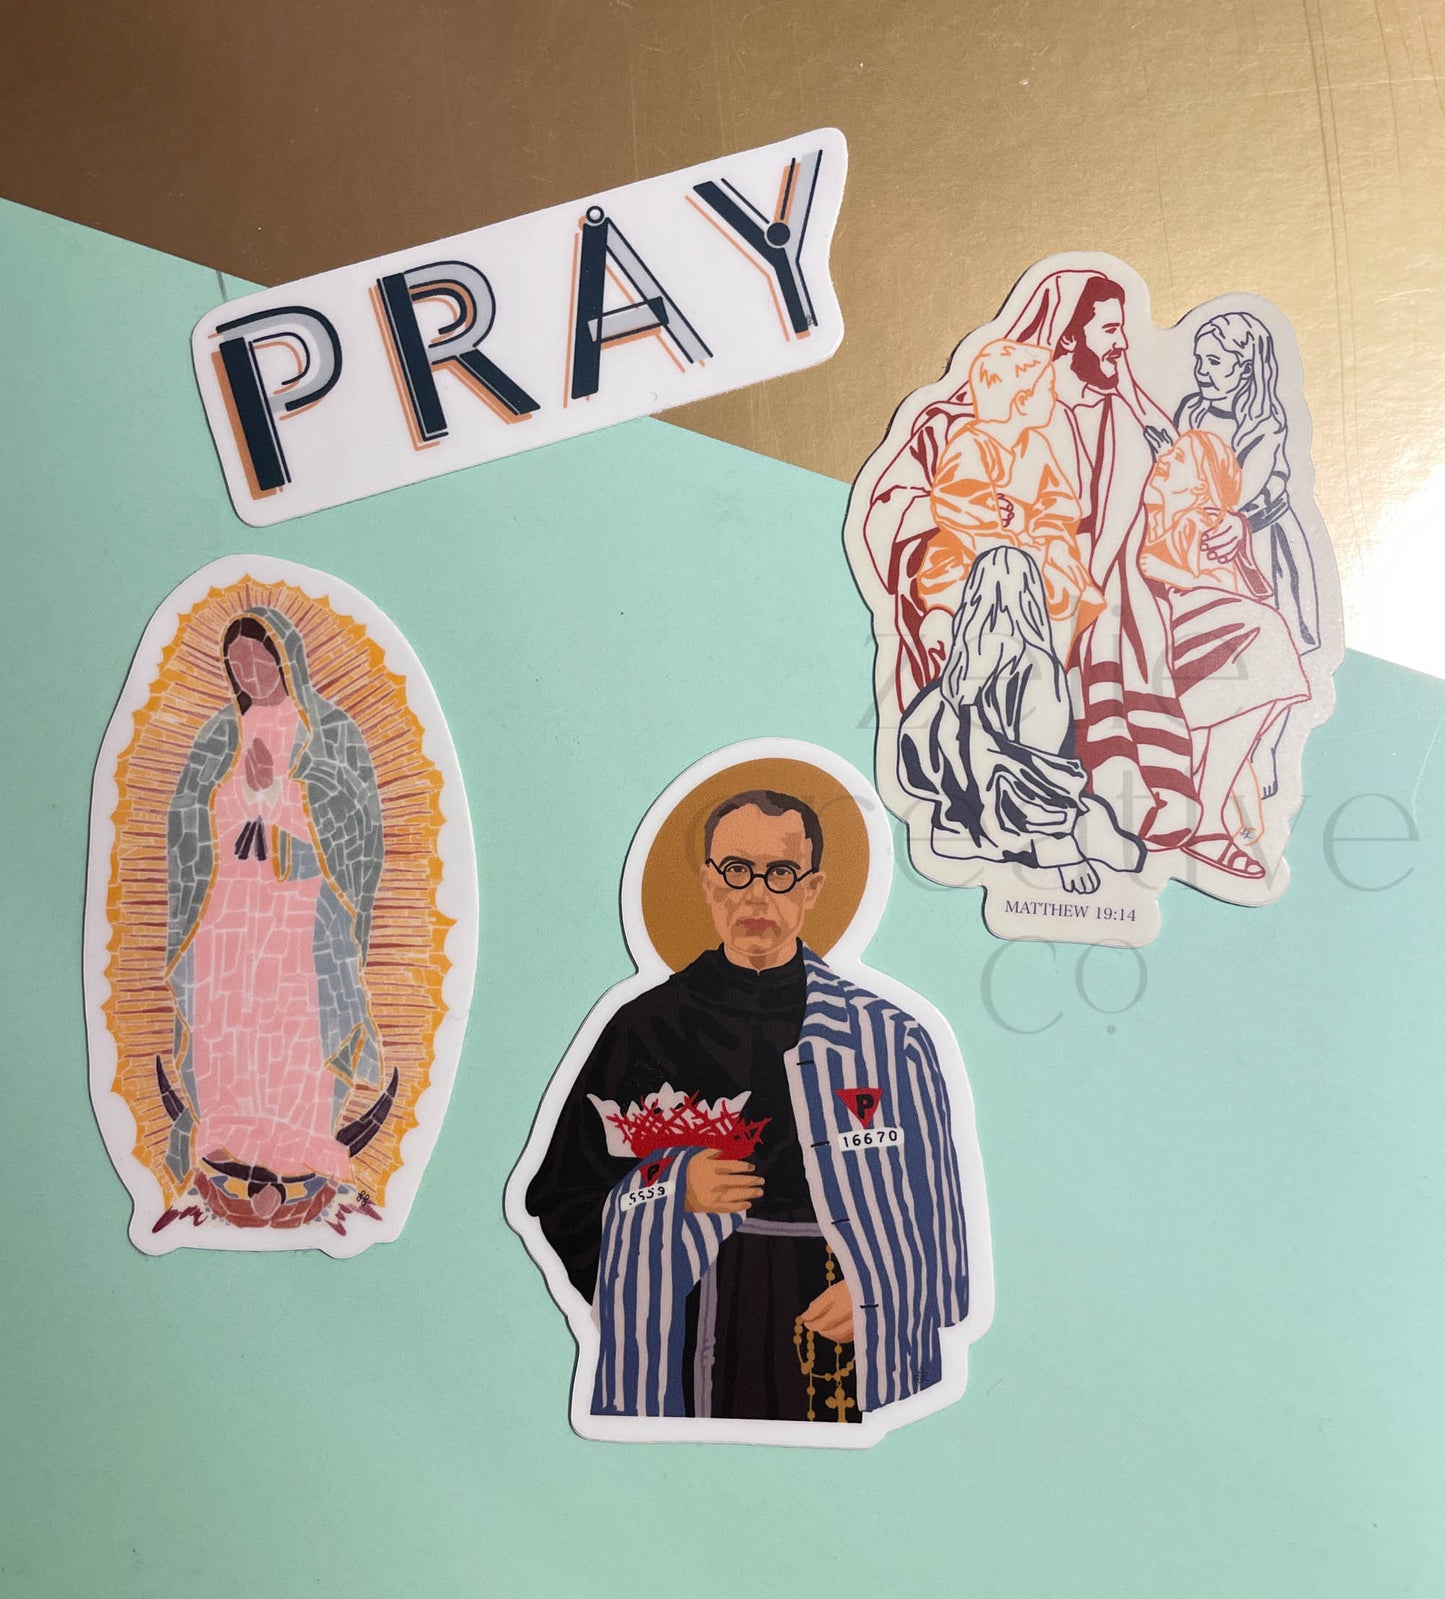 Our Lady of Guadalupe, Mosaic  |  Sticker